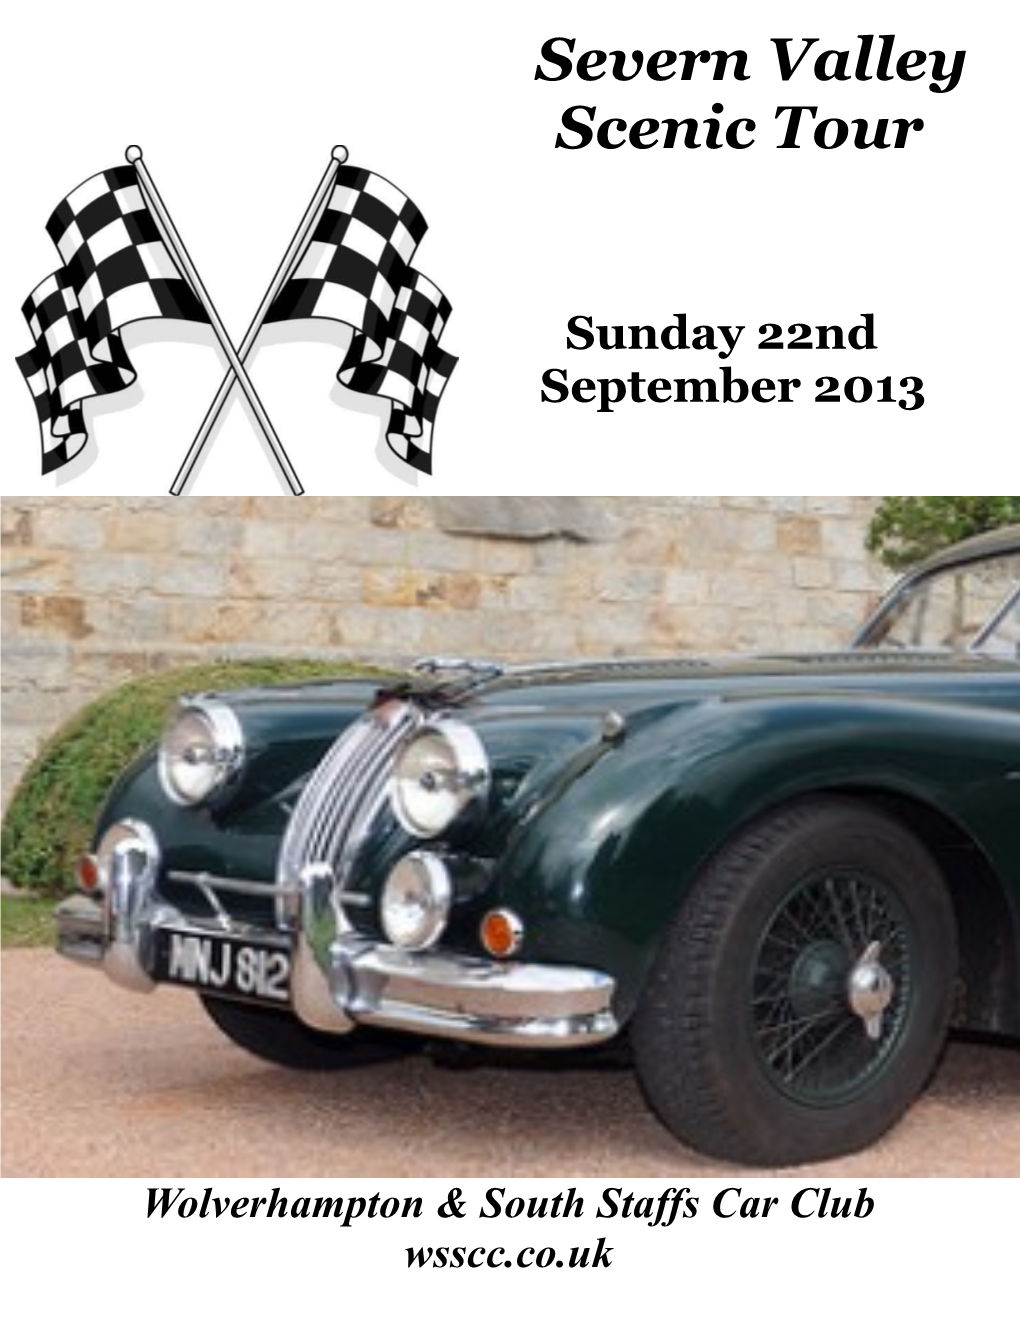 Wolverhampton & South Staffordshire Car Club Ltd Would Like to Welcome You to Join Their